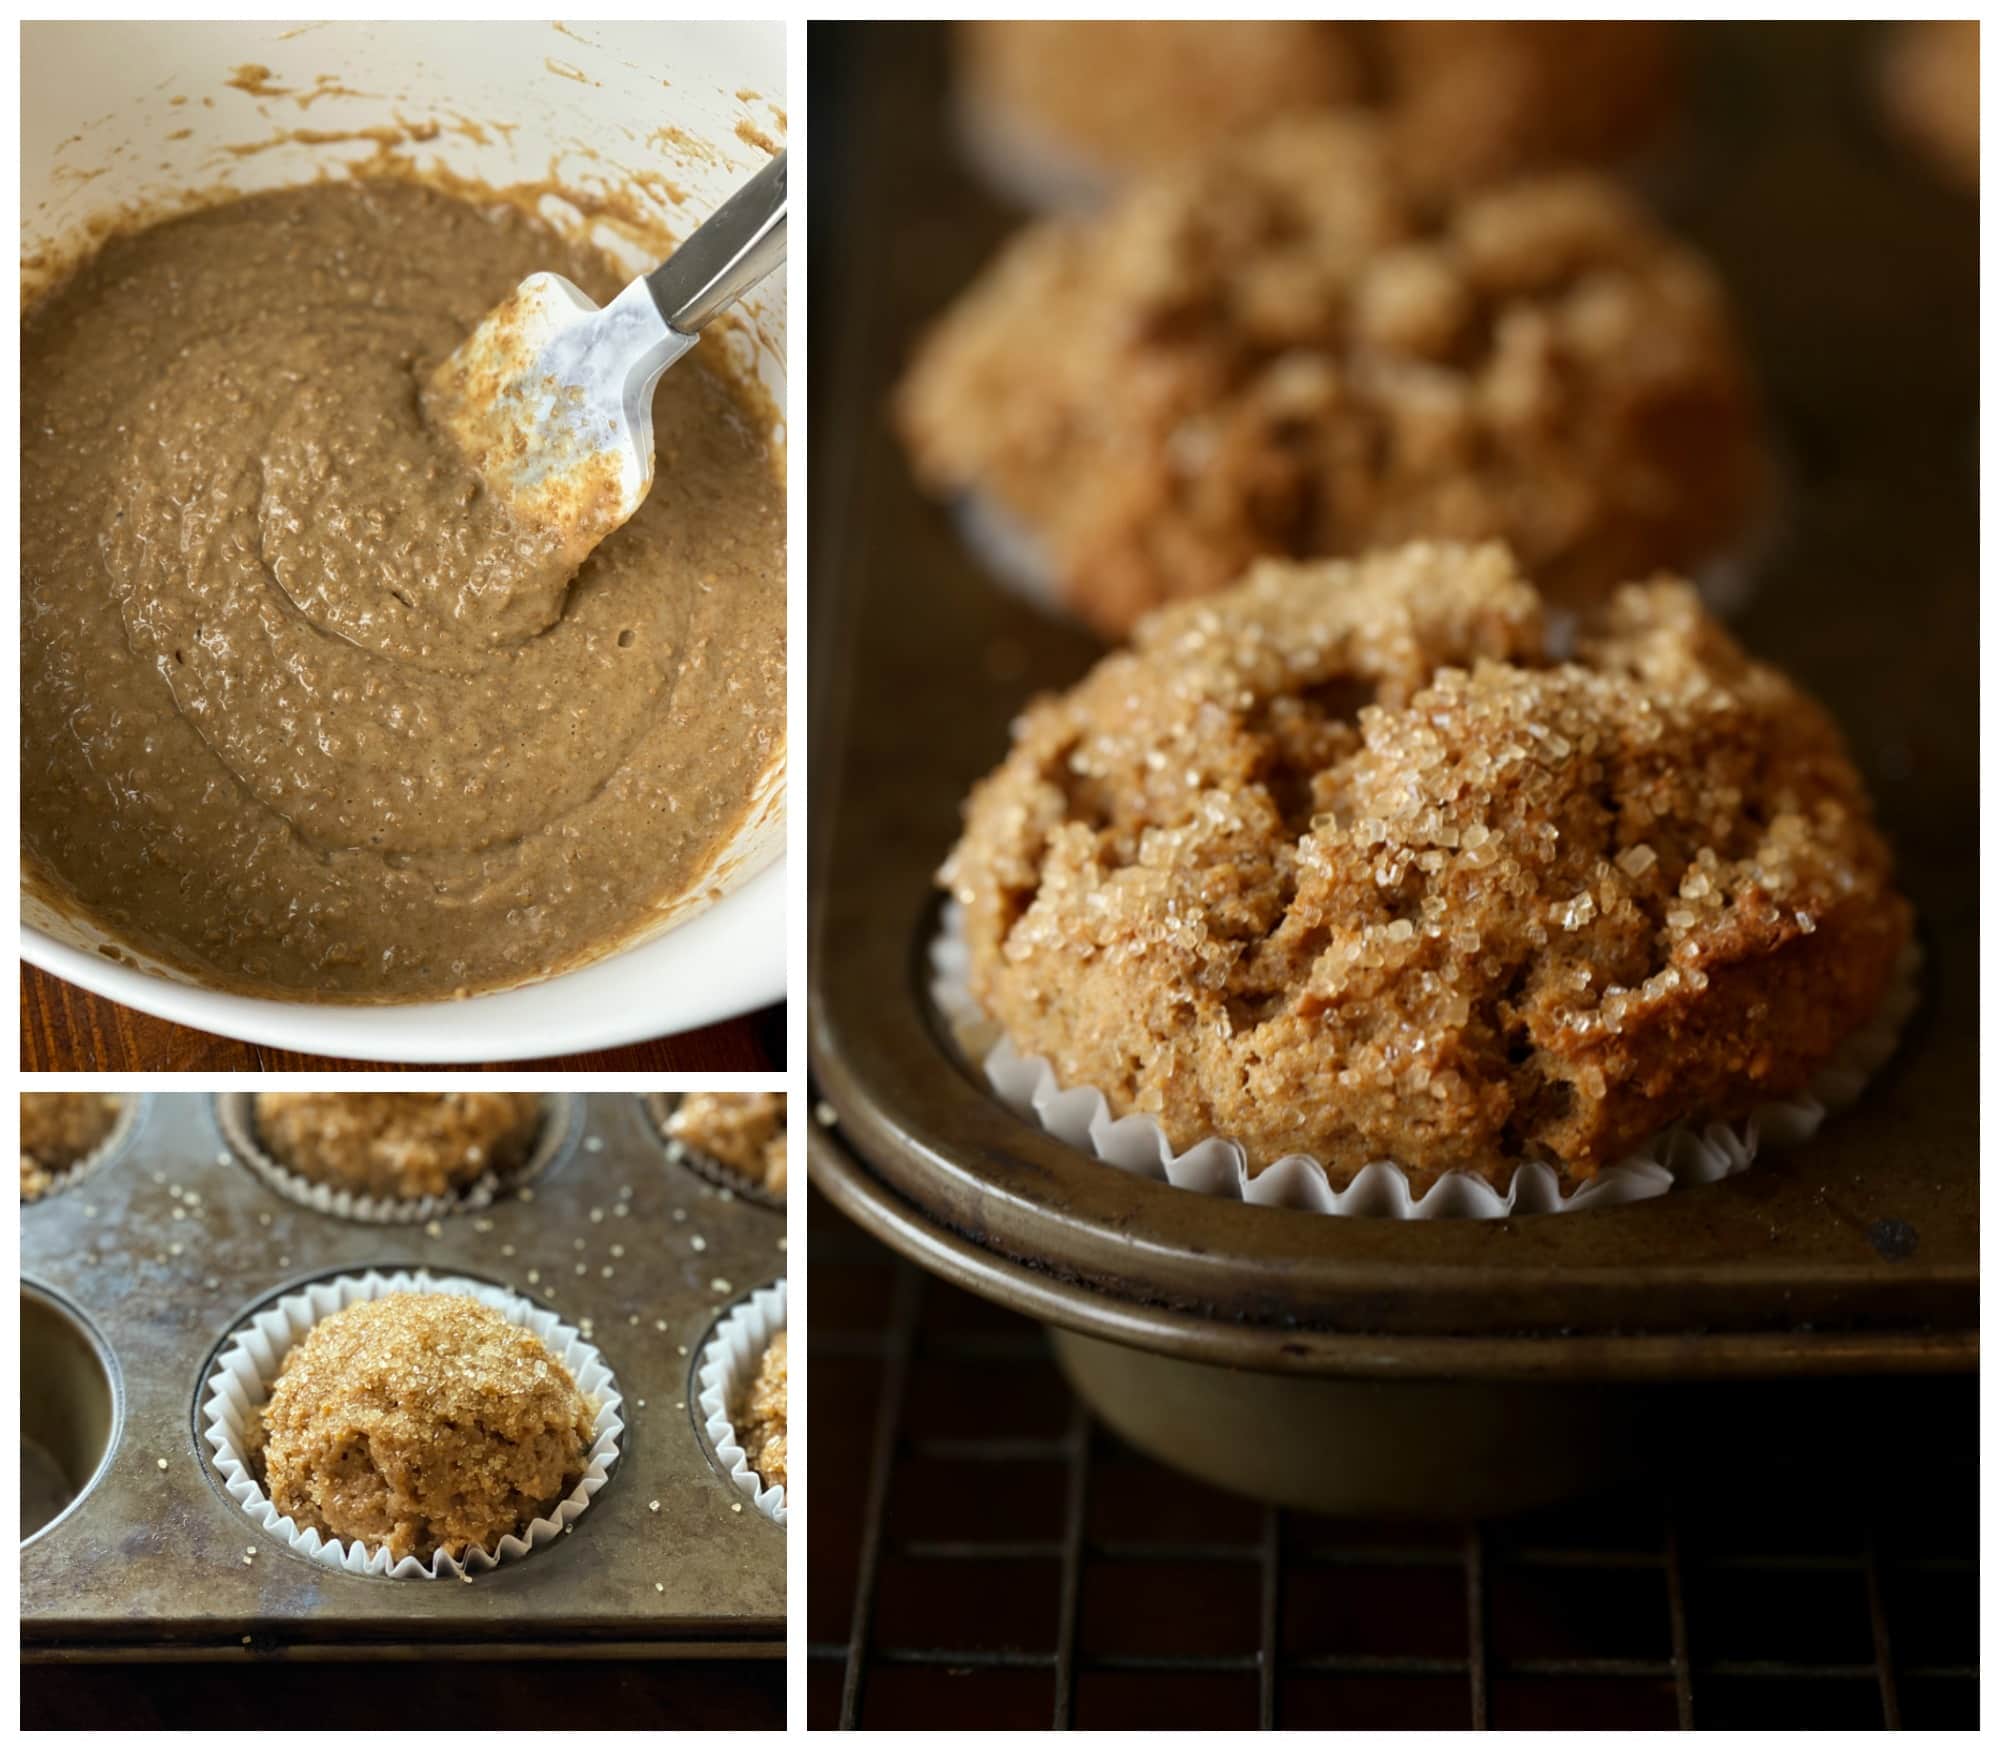 How To make Bran Muffins